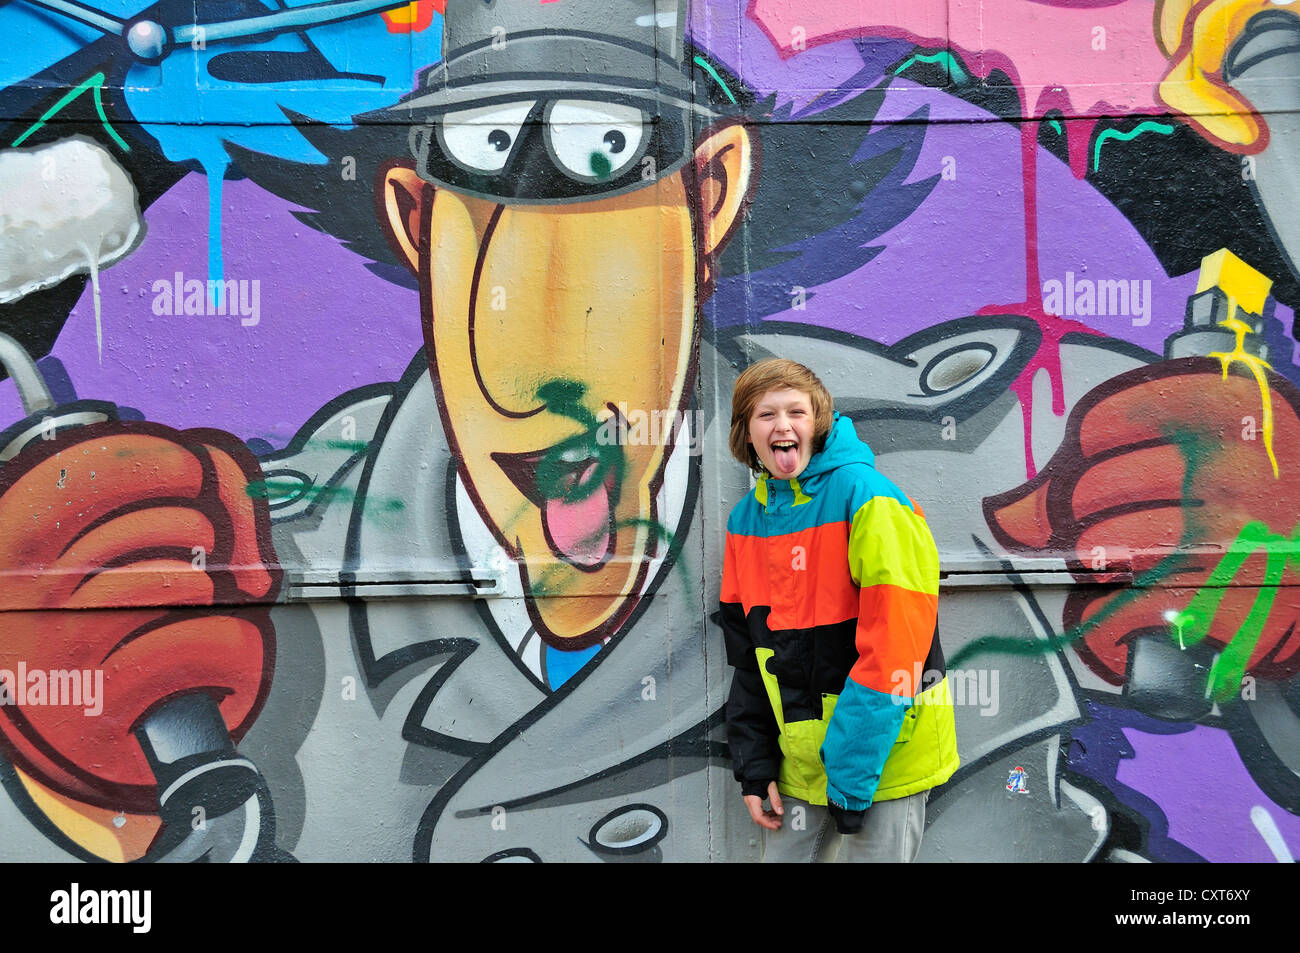 Boy, 12, cheekily poking out his tongue in front of a wall with graffiti, Cologne, North Rhine-Westphalia, PublicGround Stock Photo